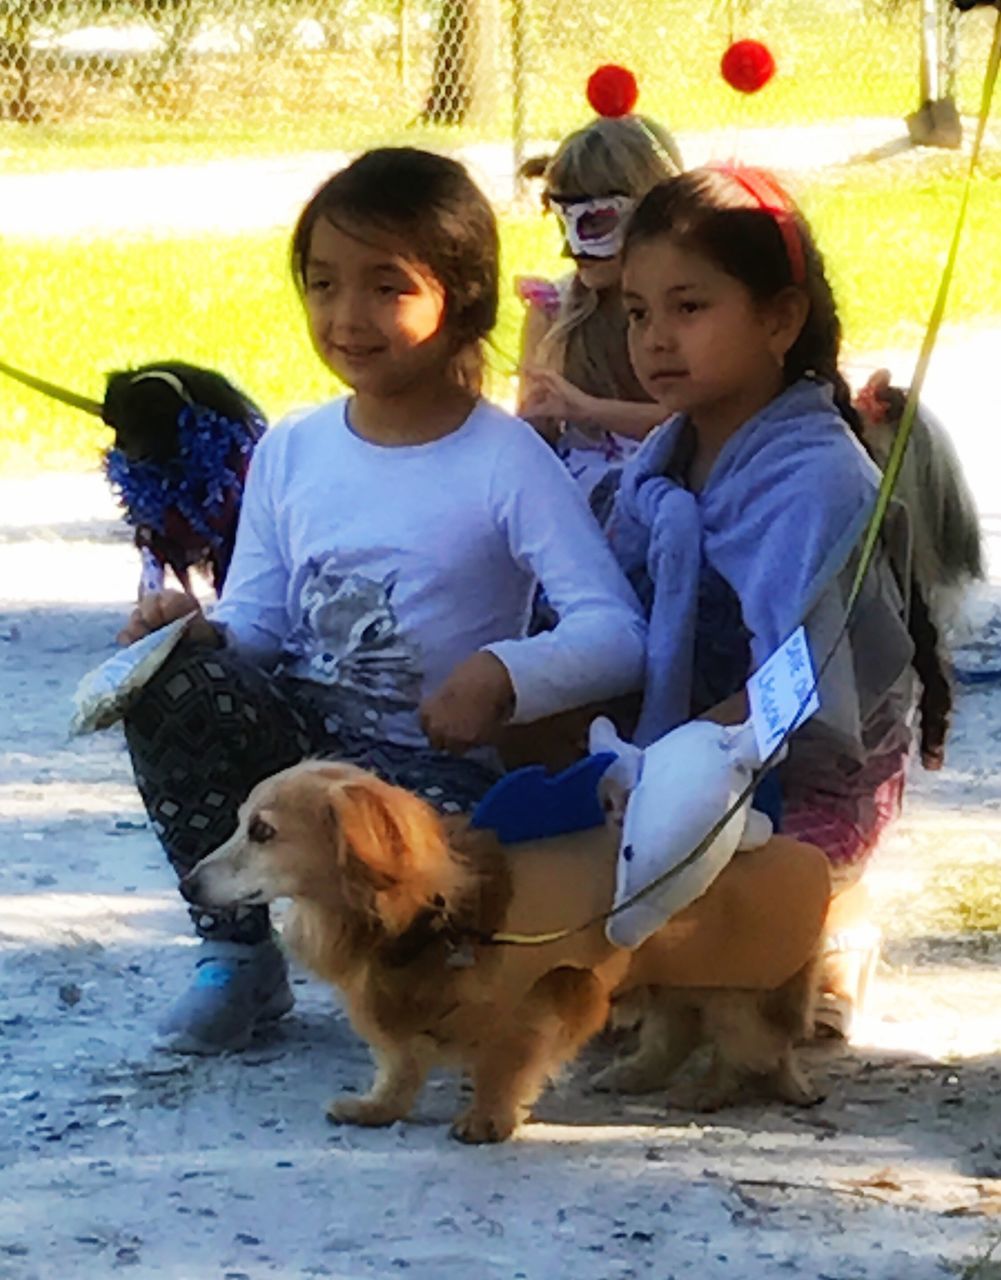 FRIENDS SITTING ON DOG WHILE LOOKING AT CAMERA